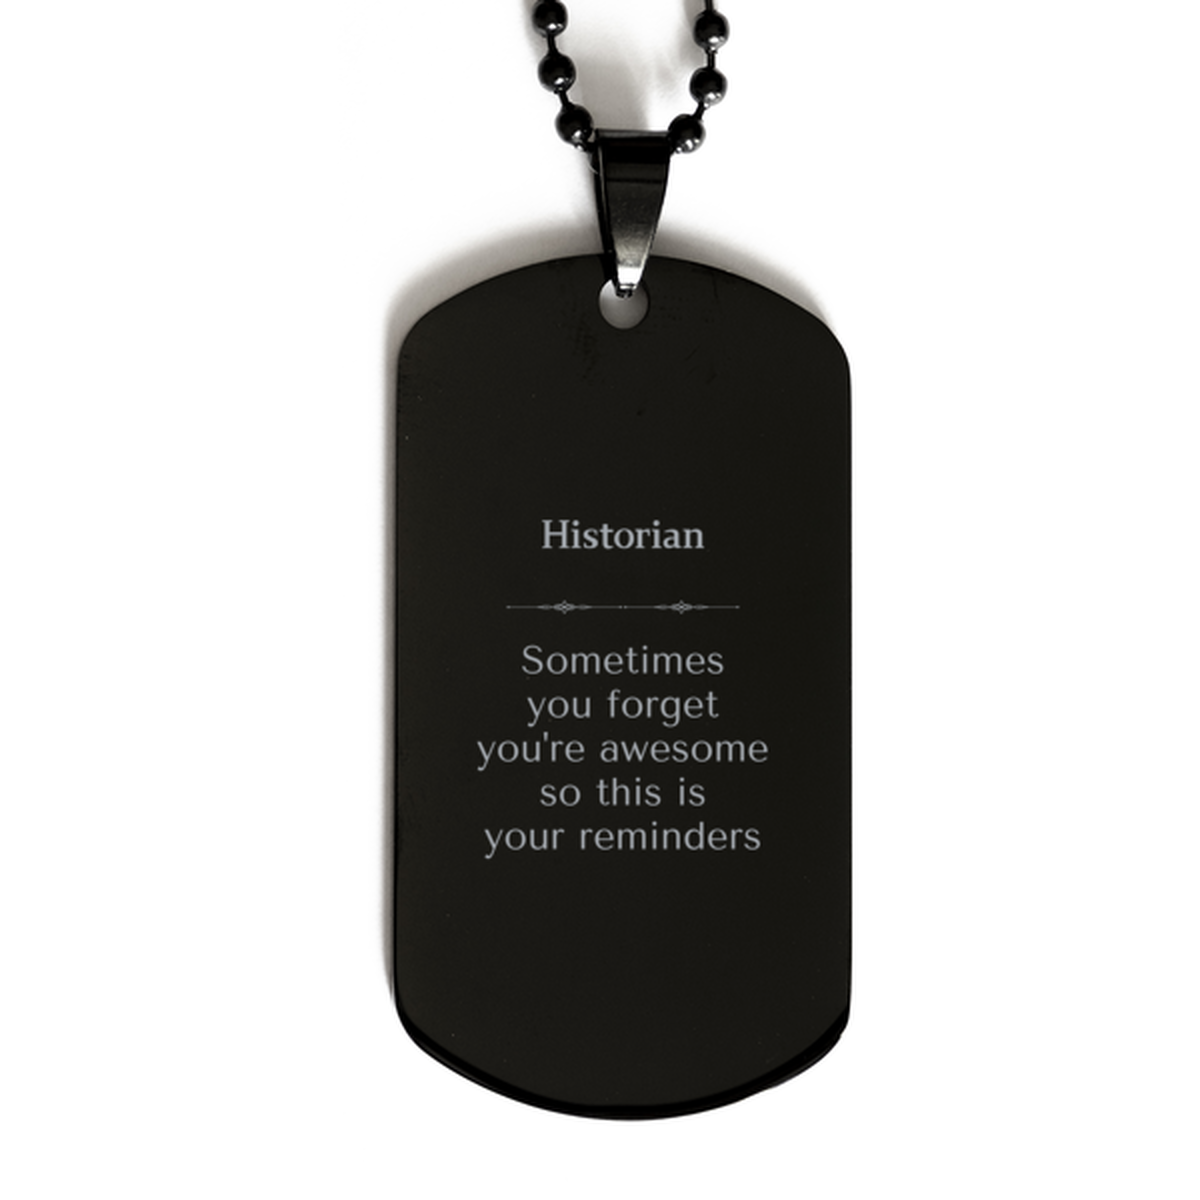 Sentimental Historian Black Dog Tag, Historian Sometimes you forget you're awesome so this is your reminders, Graduation Christmas Birthday Gifts for Historian, Men, Women, Coworkers